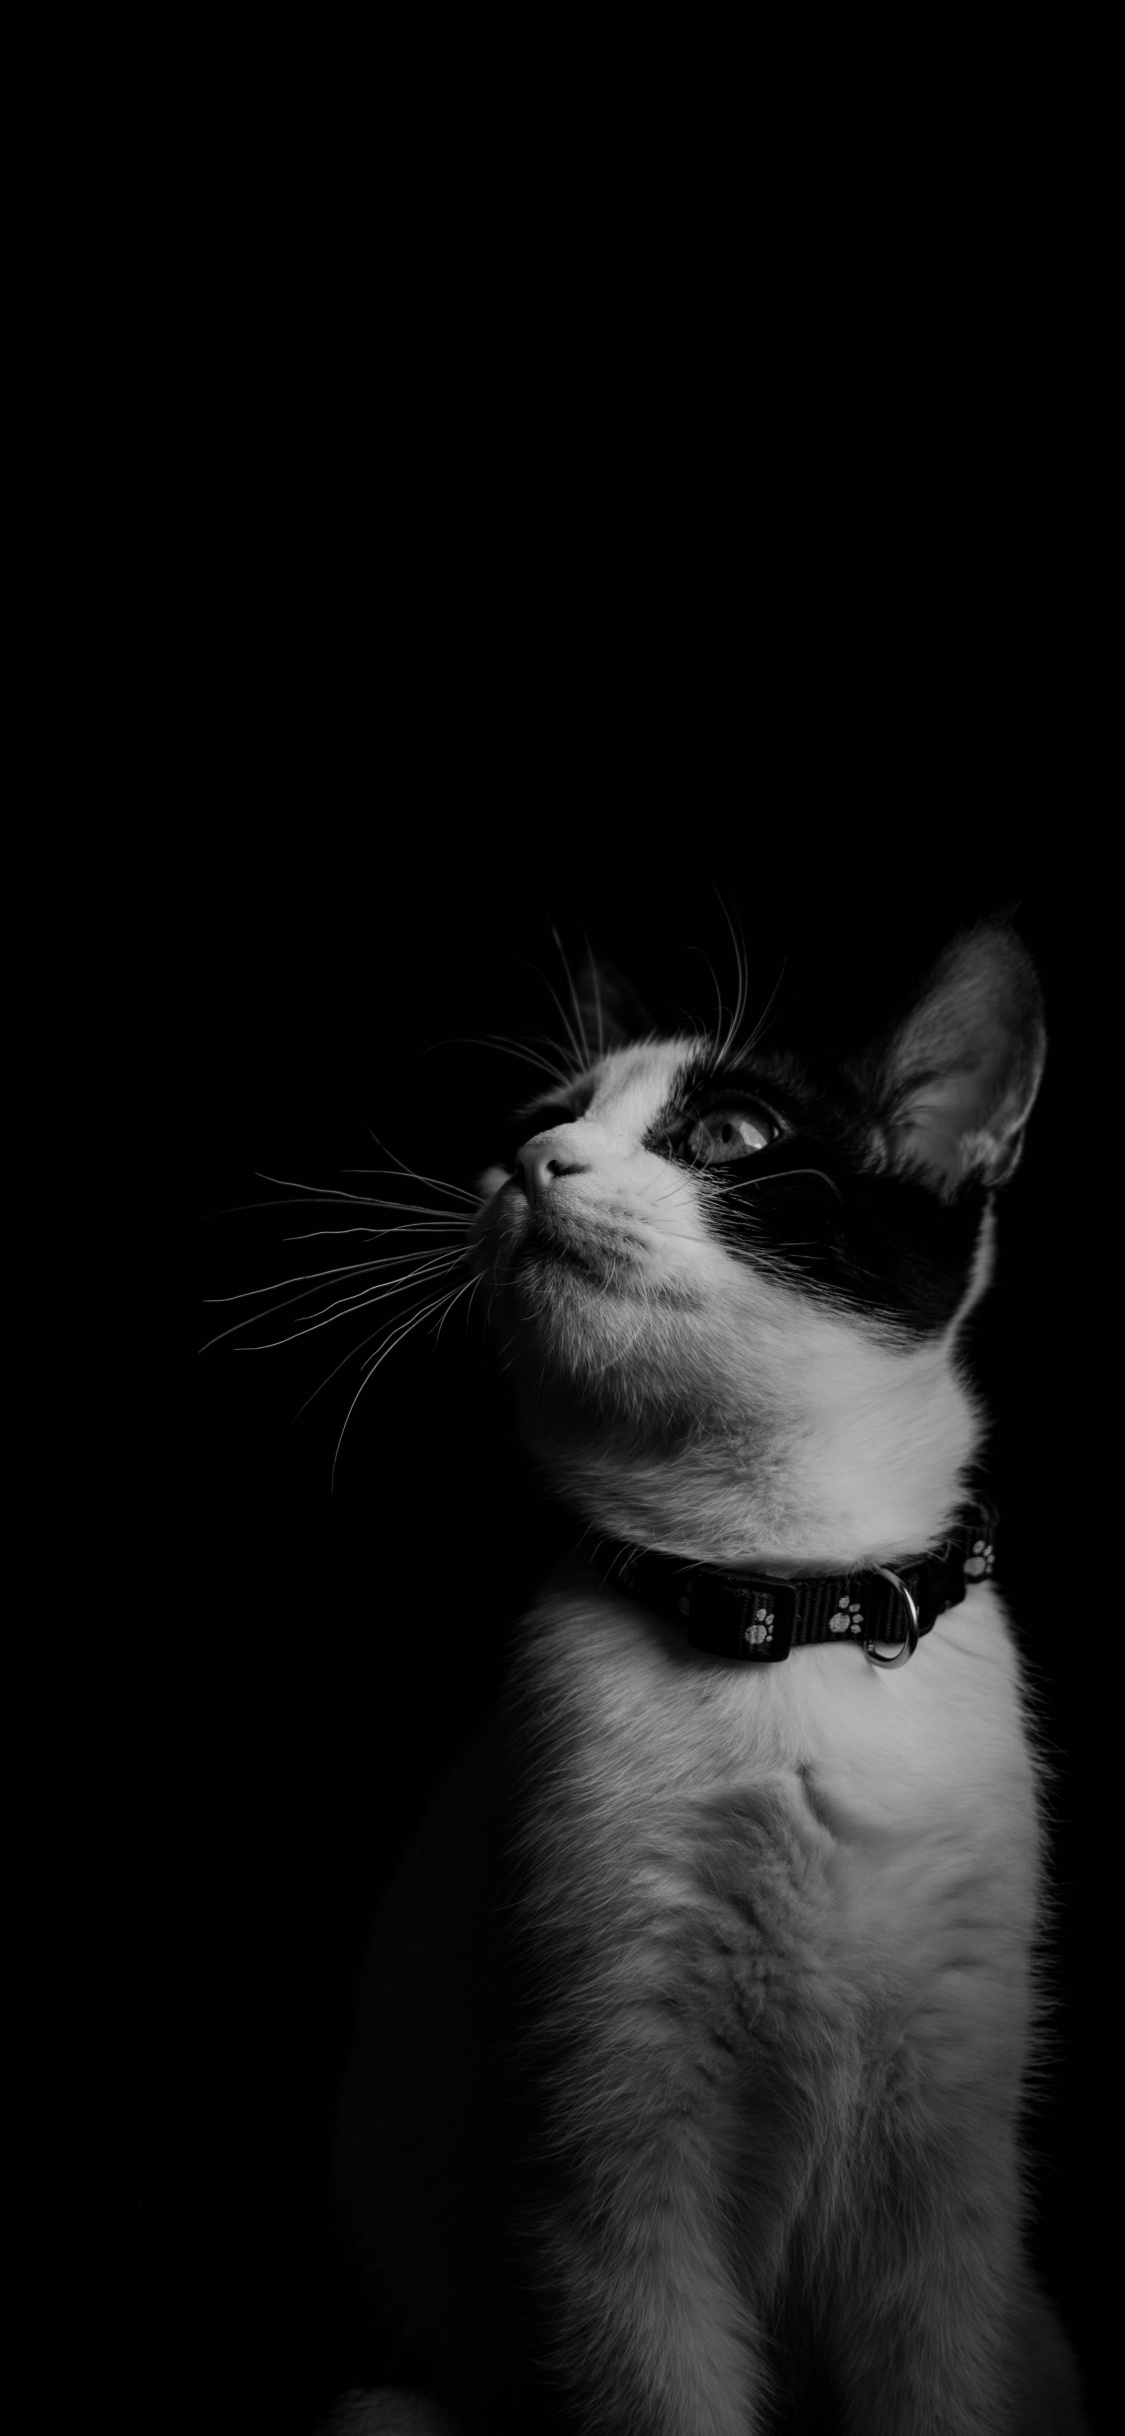 Grayscale Photo of Cat With Black Background. Wallpaper in 1125x2436 Resolution